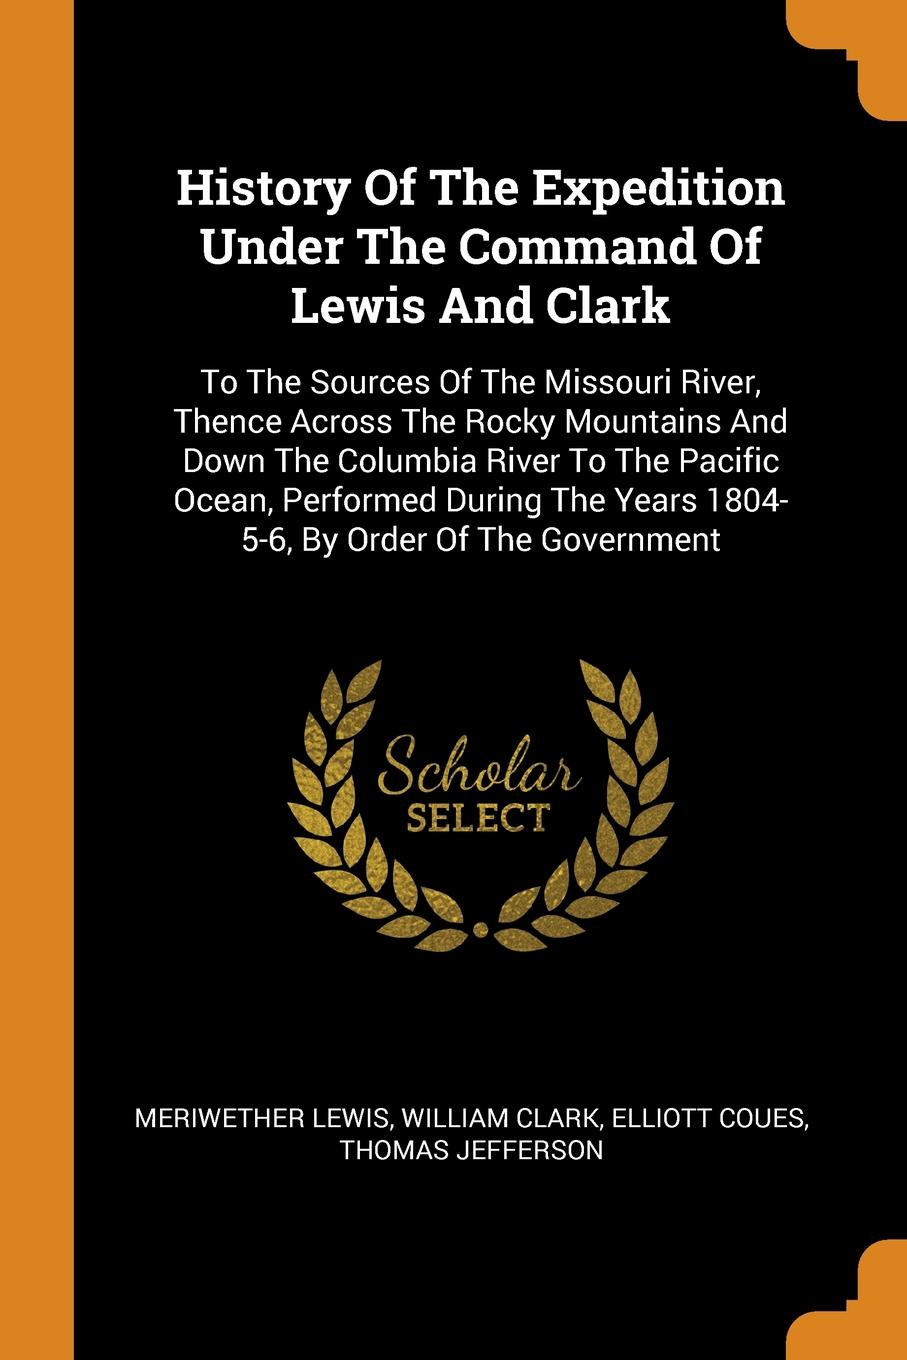 History Of The Expedition Under The Command Of Lewis And Clark. To The Sources Of The Missouri River, Thence Across The Rocky Mountains And Down The Columbia River To The Pacific Ocean, Performed During The Years 1804-5-6, By Order Of The Government